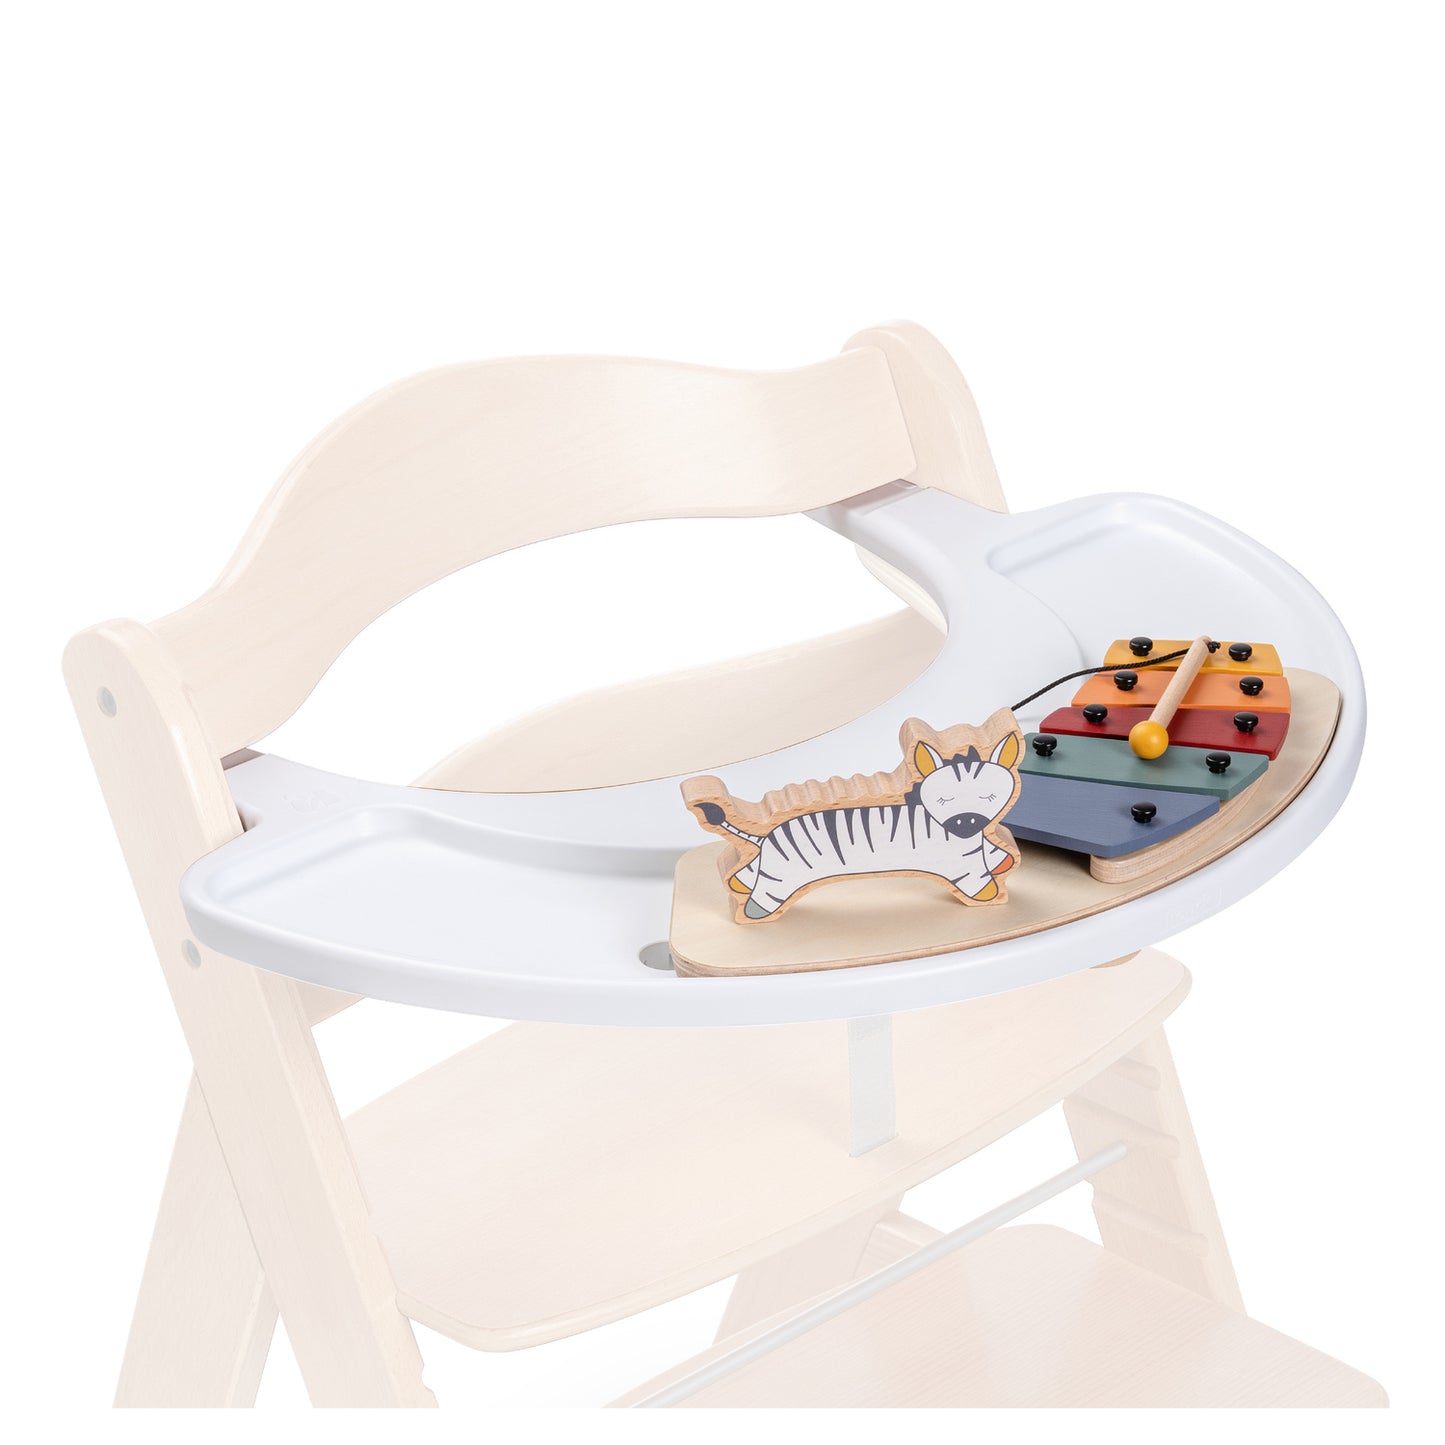 hauck Alpha Play Music Set Wooden Highchair Playset and Tray